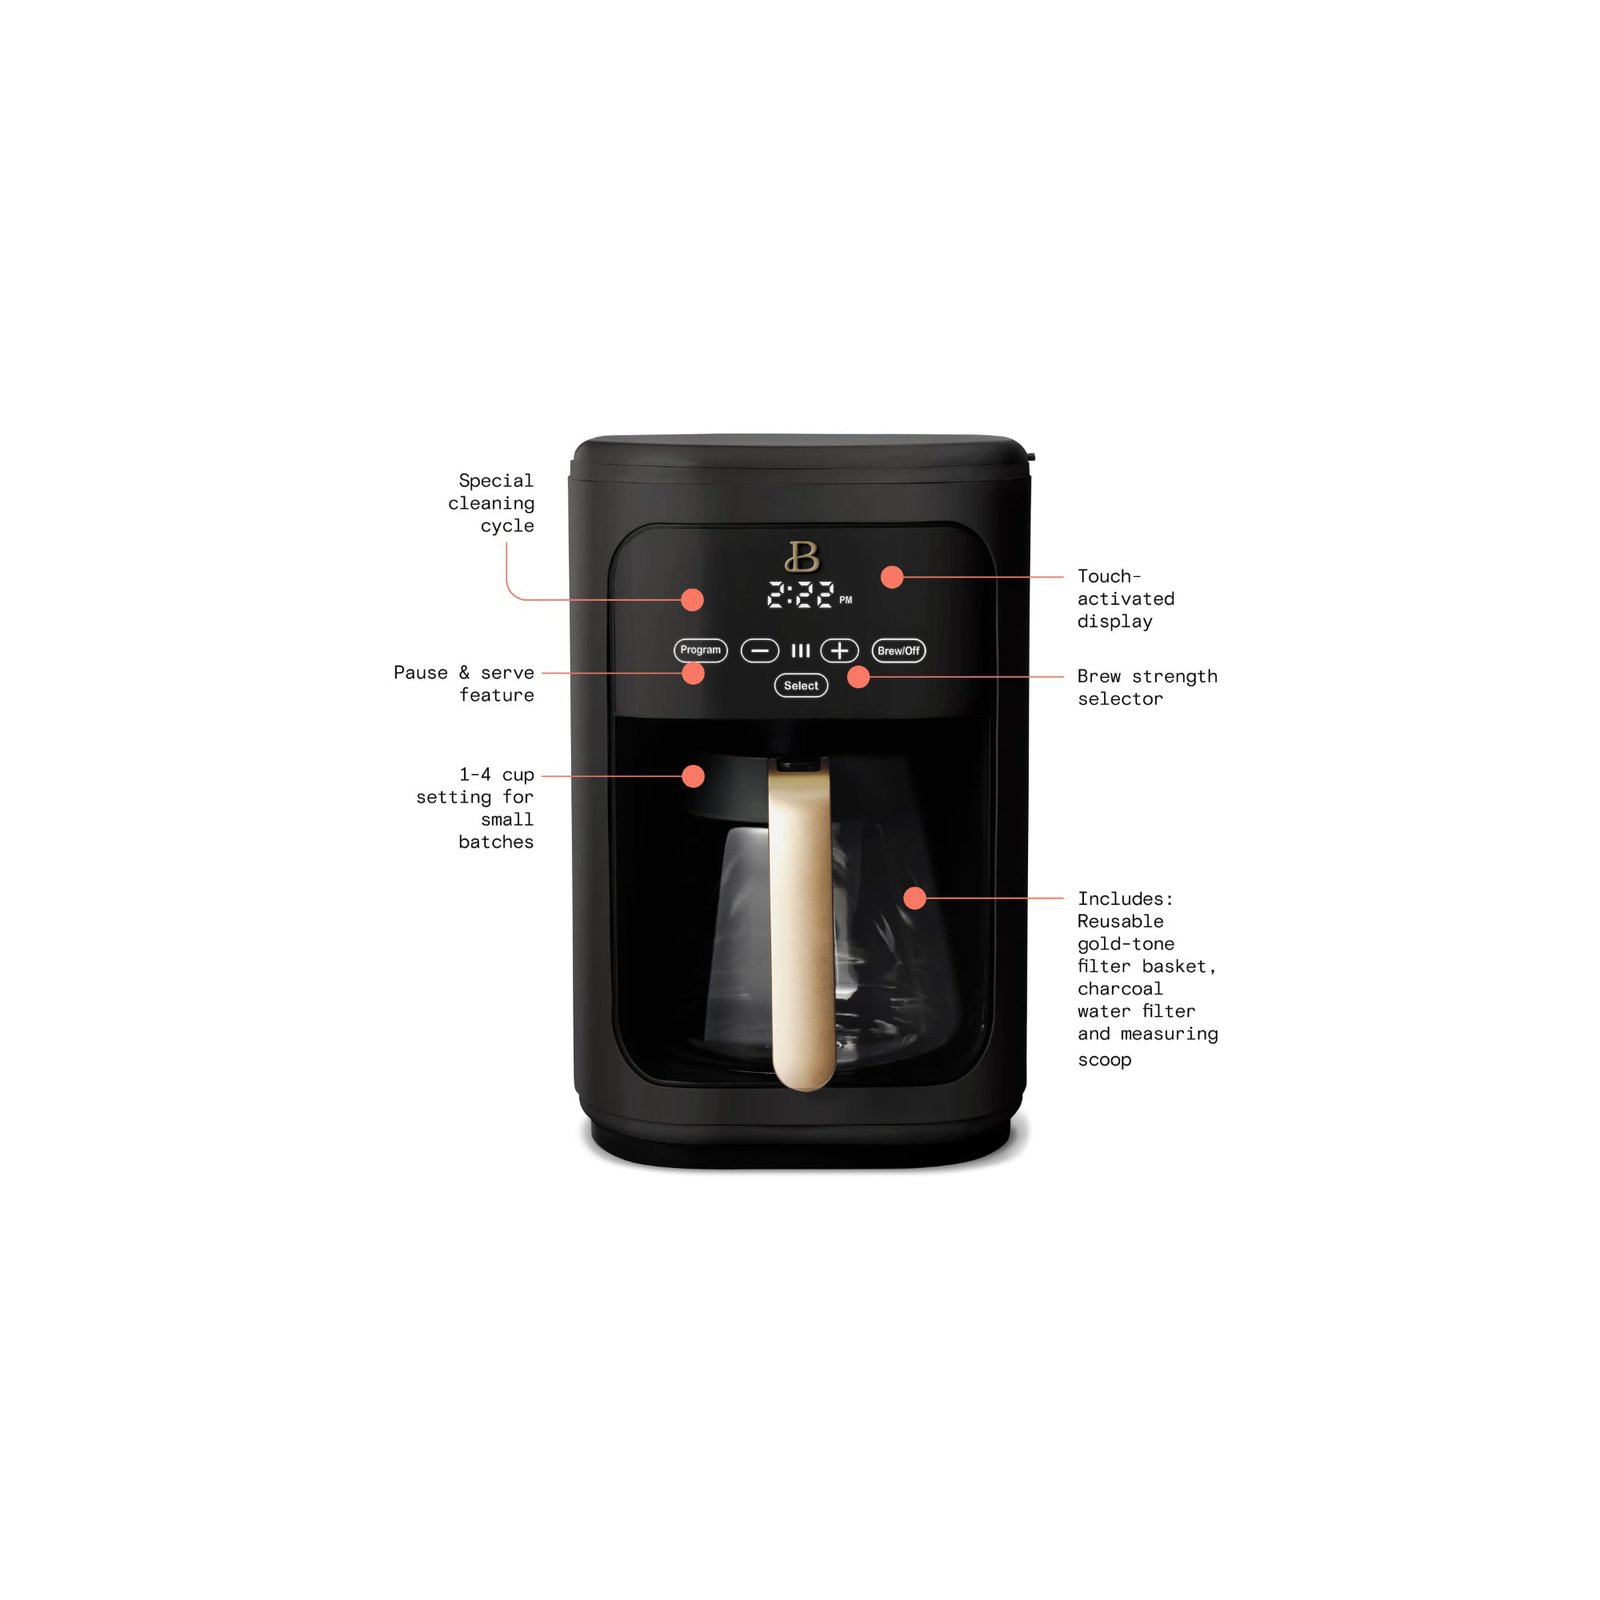 Beautiful 14 Cup Touchscreen Coffee Maker, Black Sesame by Drew